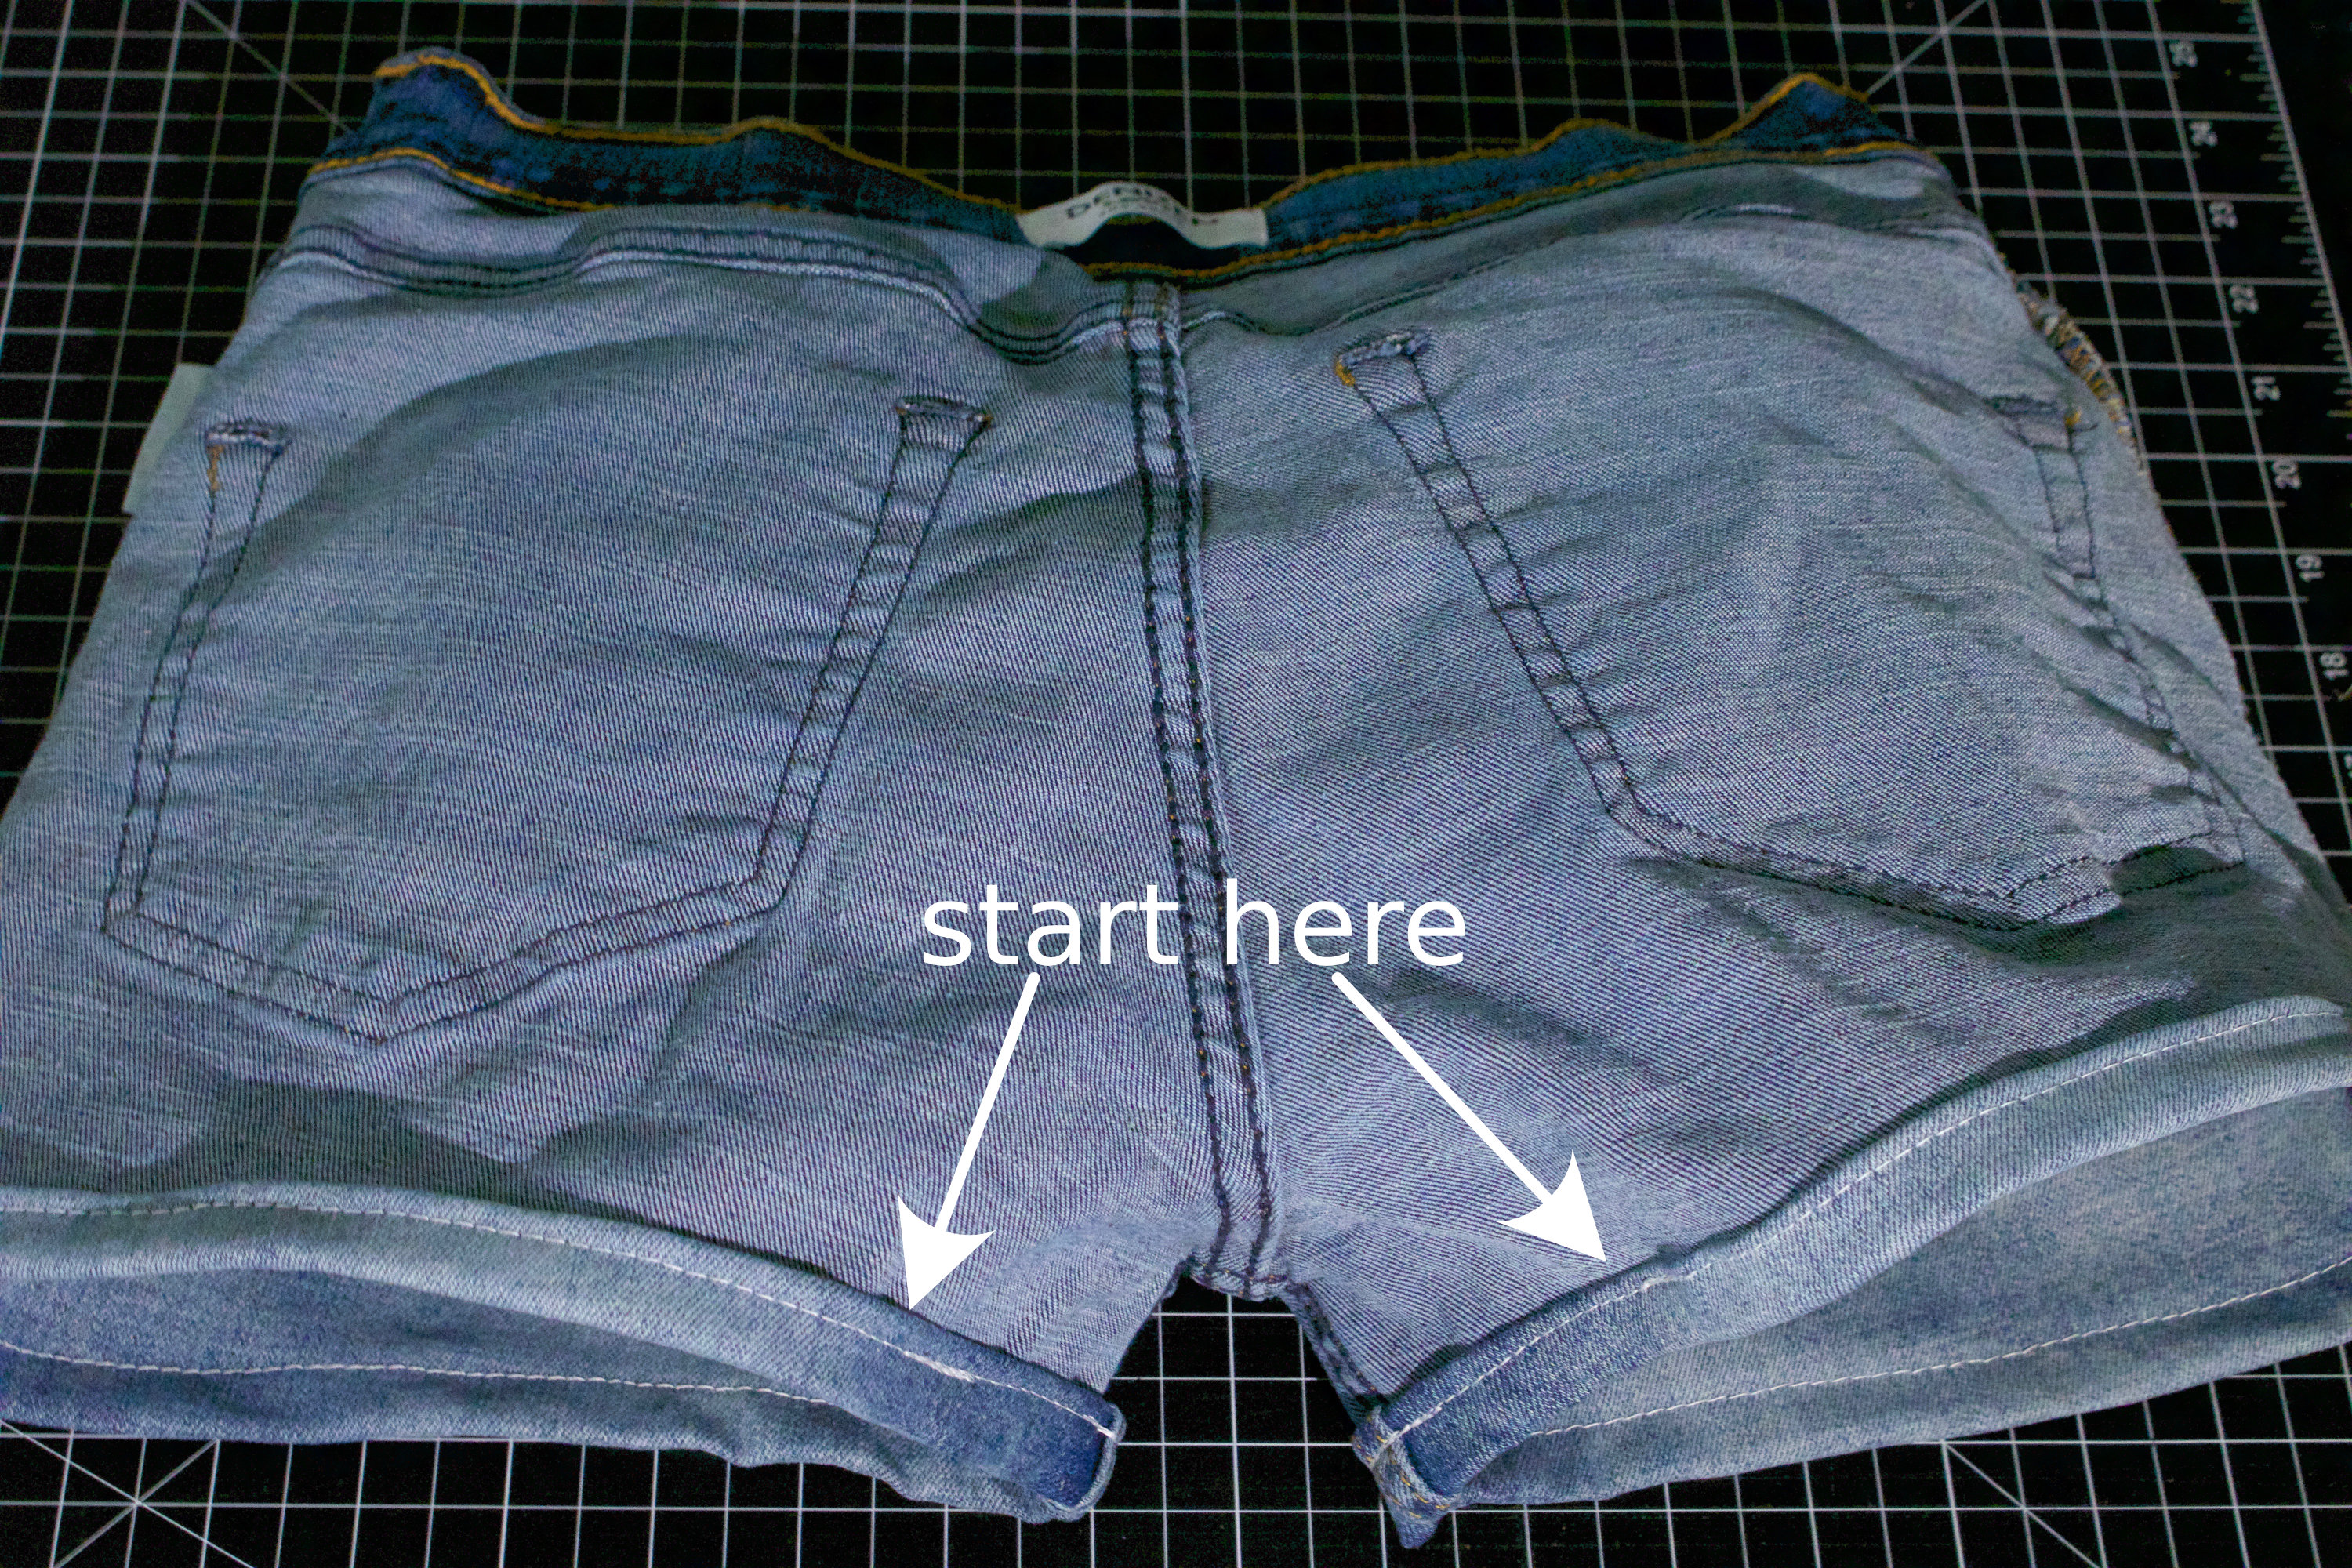 Photo of completed shorts, inside out, rear side up, with a pair of arrows pointing to the aforementioned point on the hems, both originating from the text “start here”.